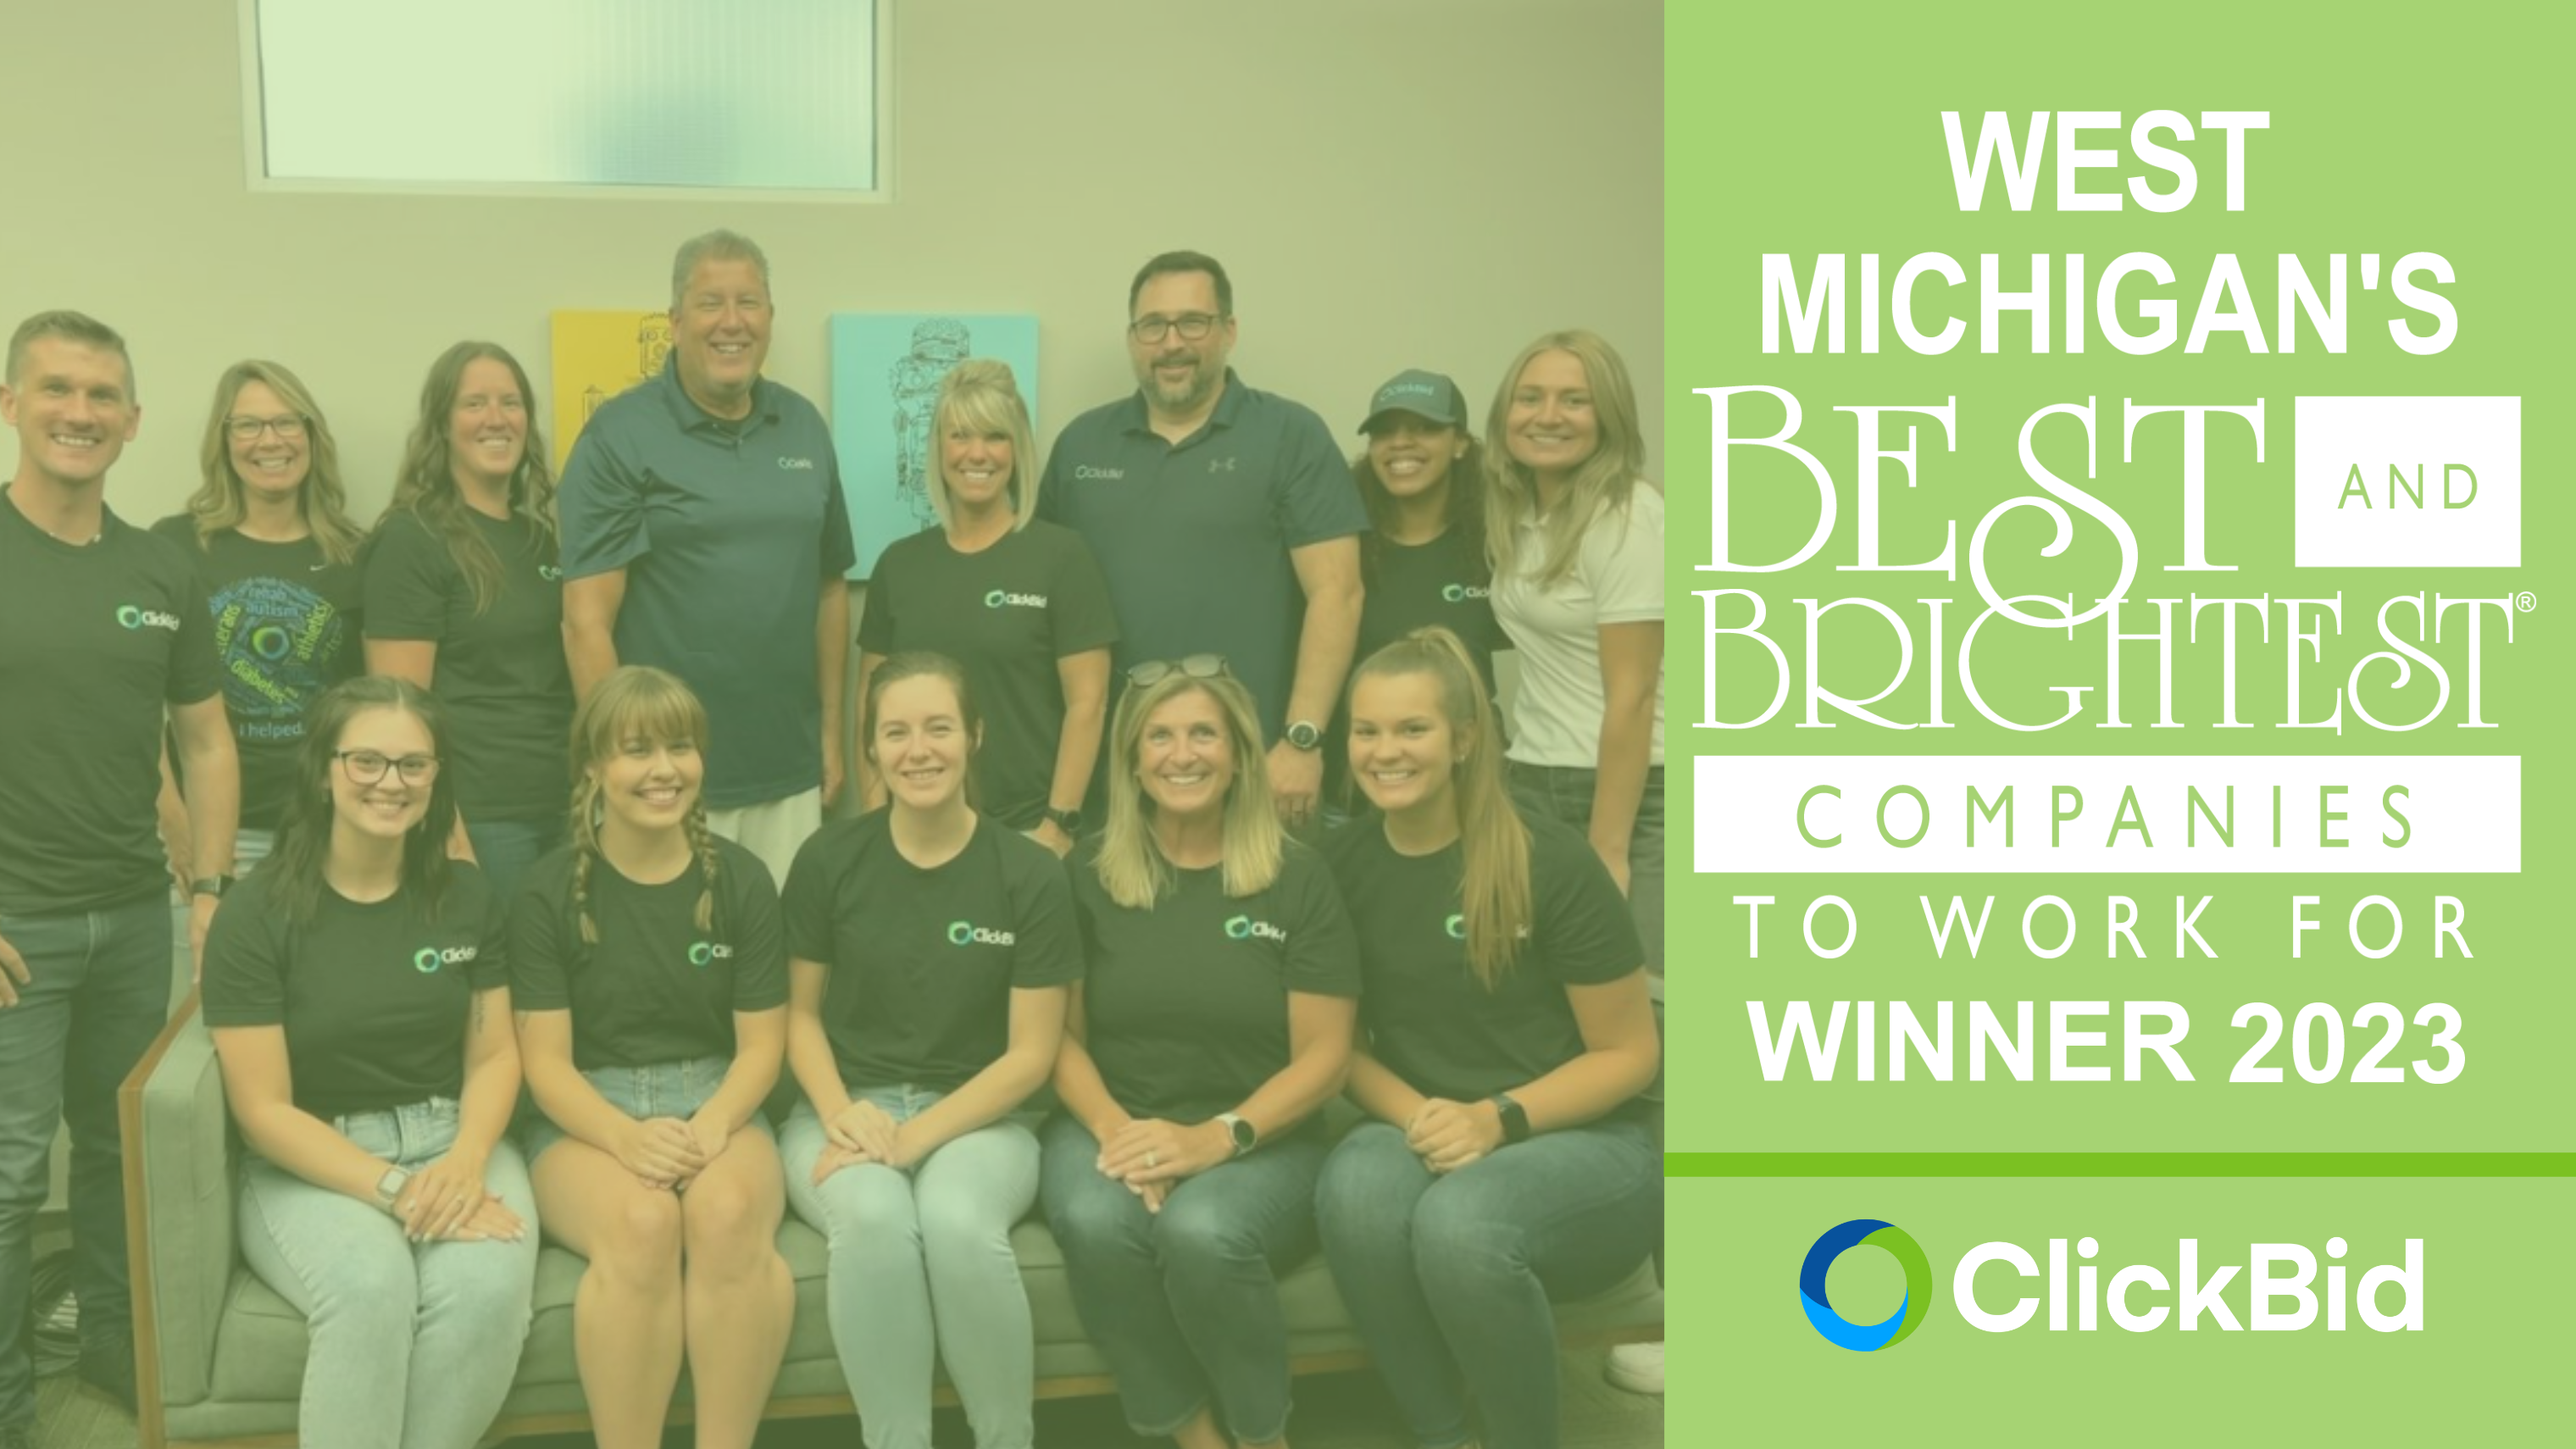 ClickBid Named One of West Michigan’s Best and Brightest Companies To Work For